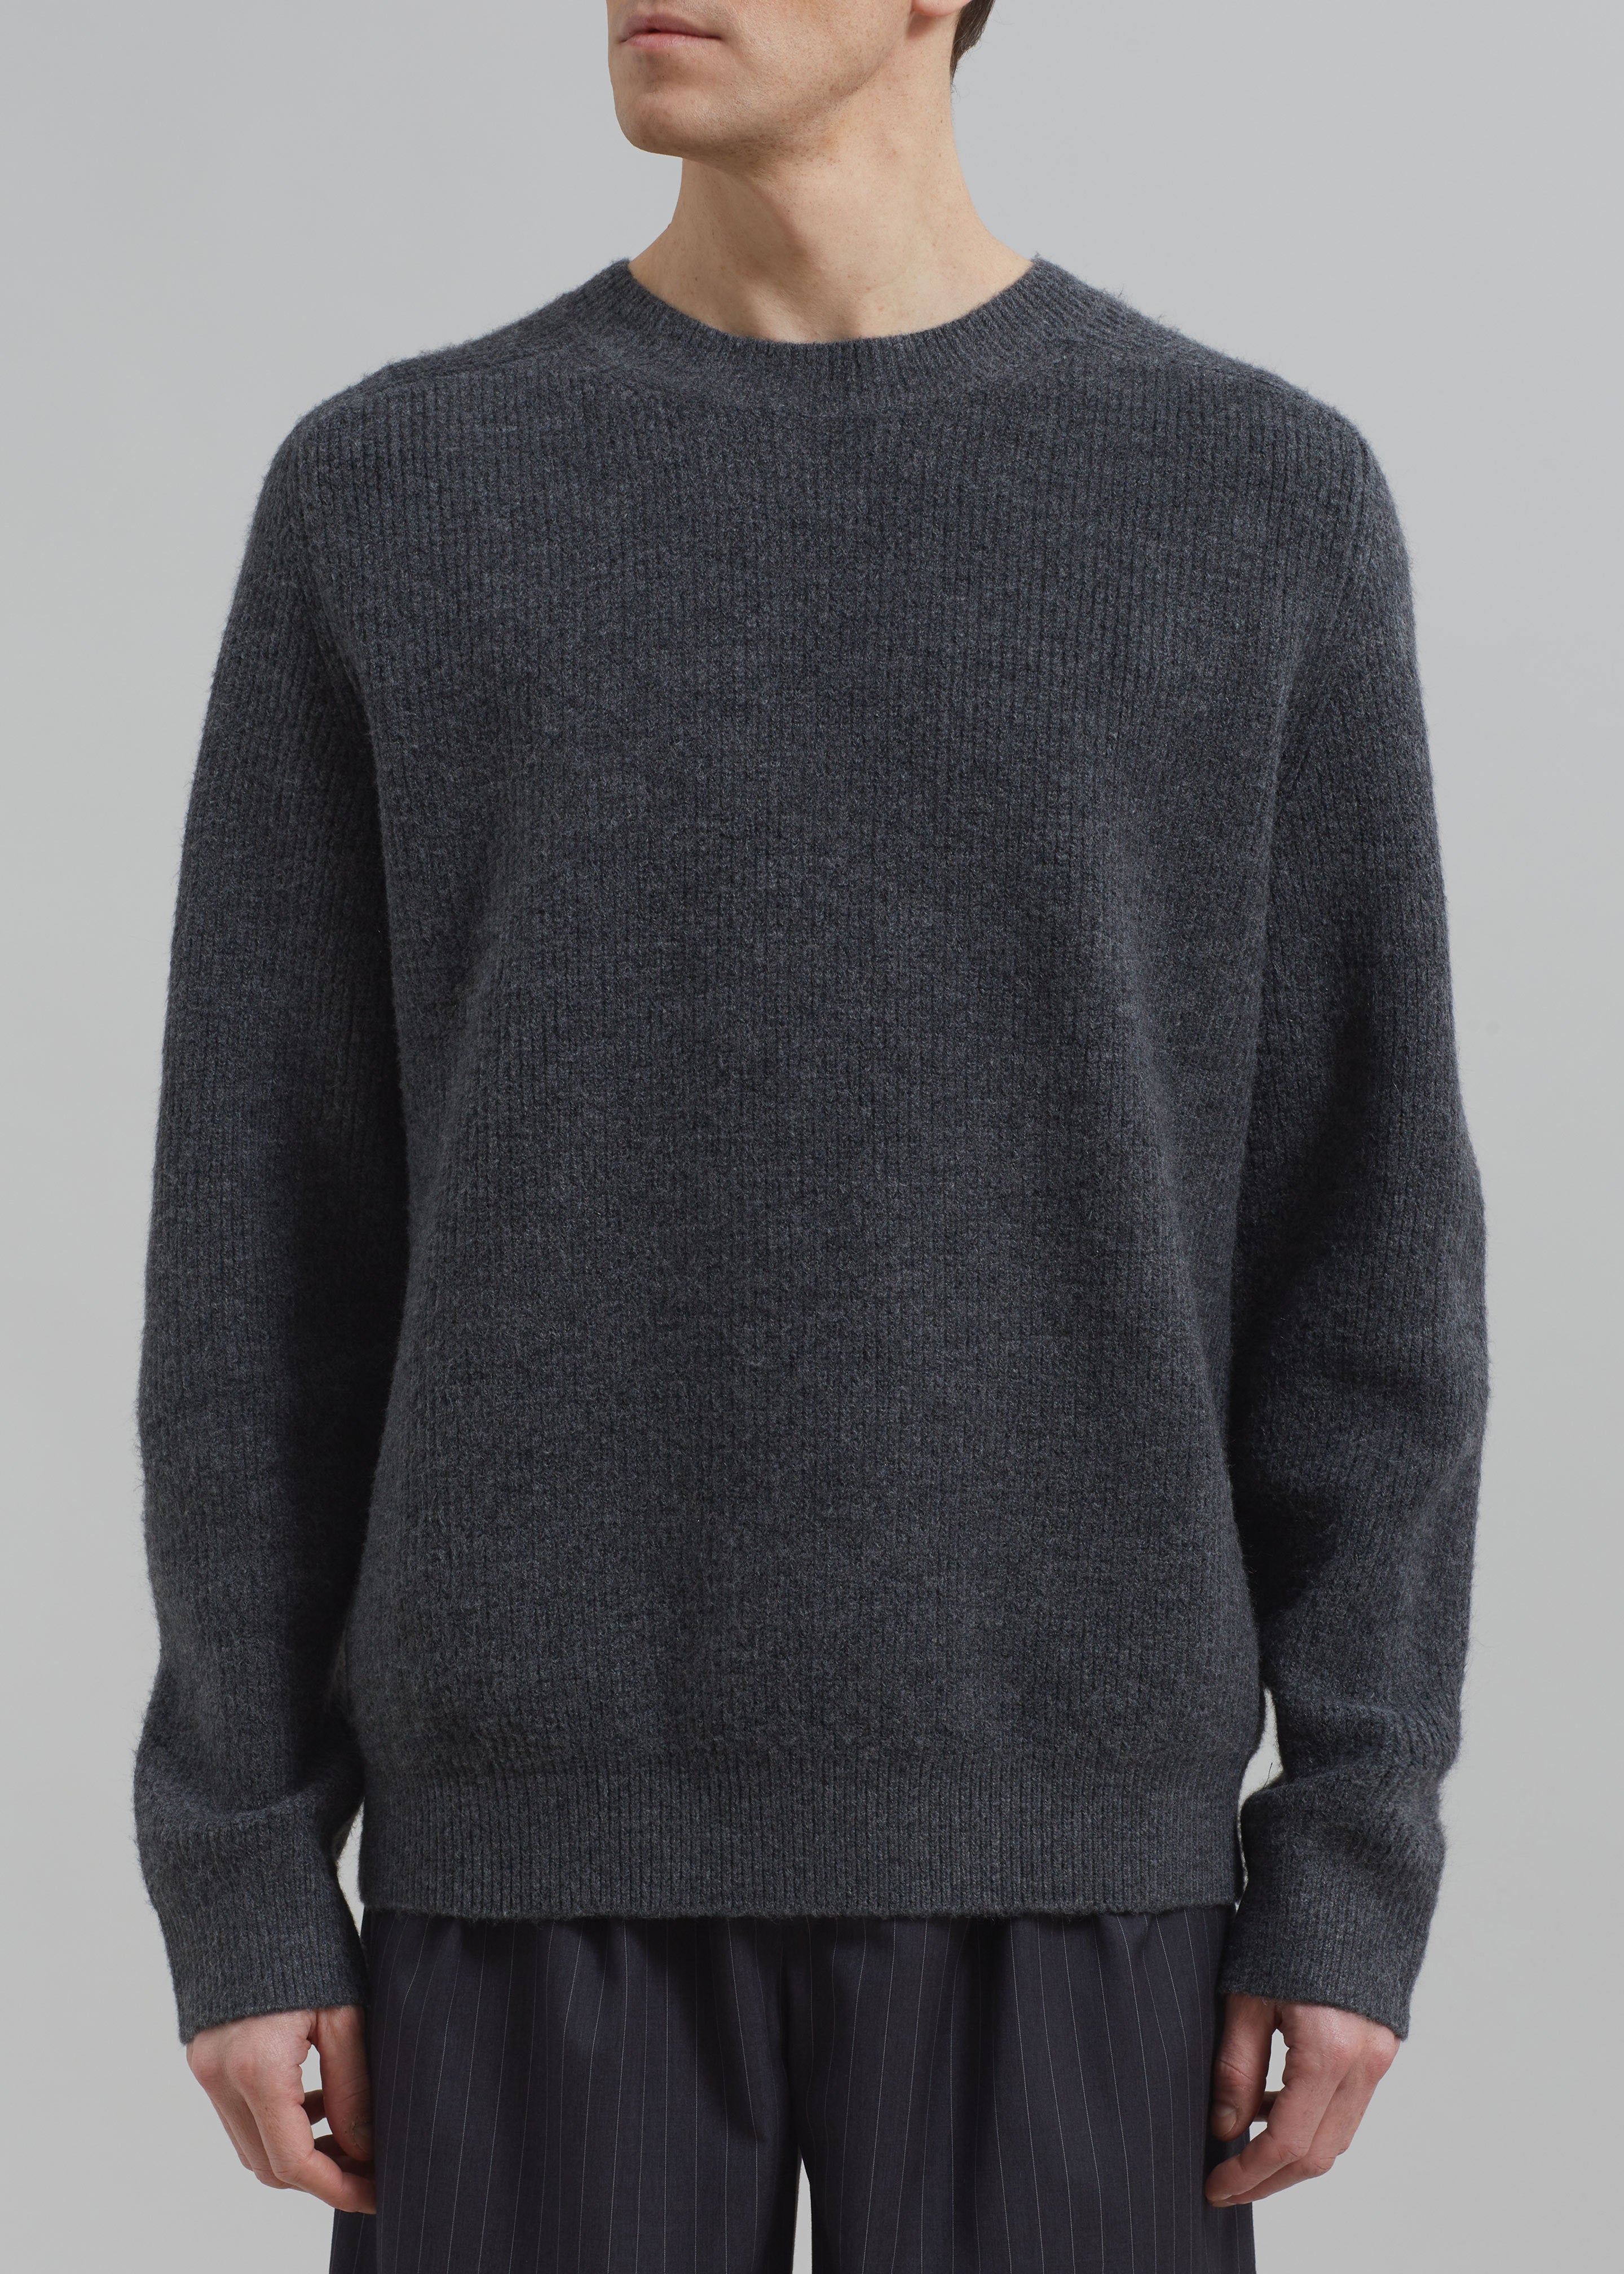 Emory Sweater - Charcoal - 12